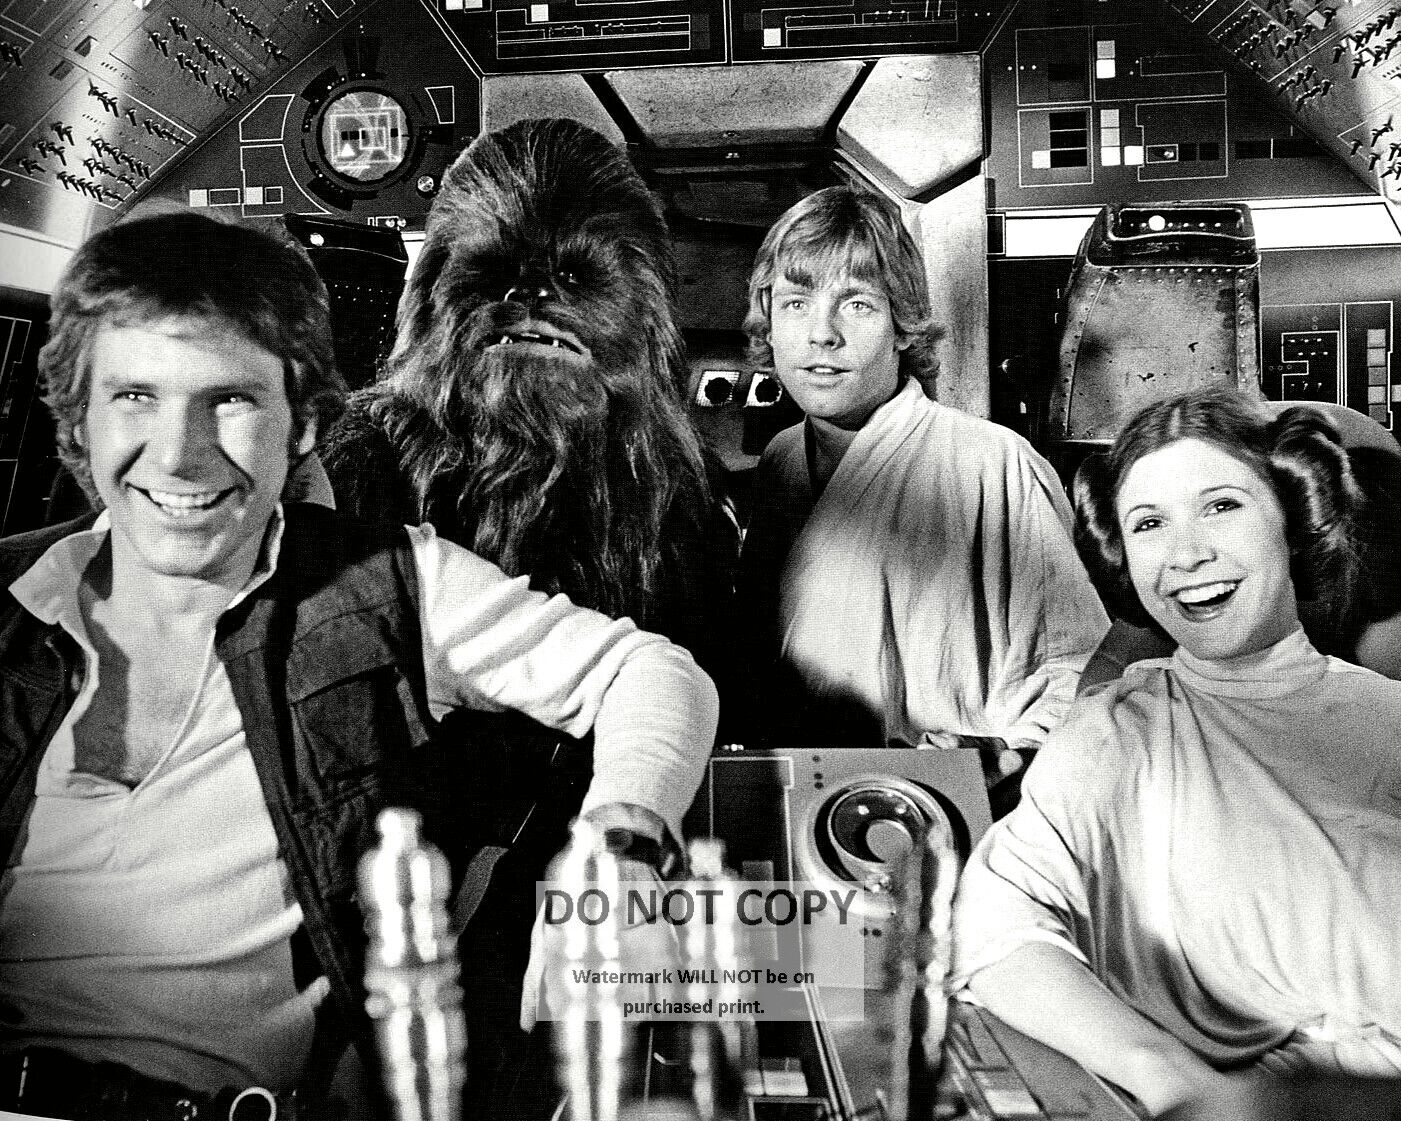 HARRISON FORD, MARK HAMILL & CARRIE FISHER - 8X10 PUBLICITY PHOTO (ZZ-659)